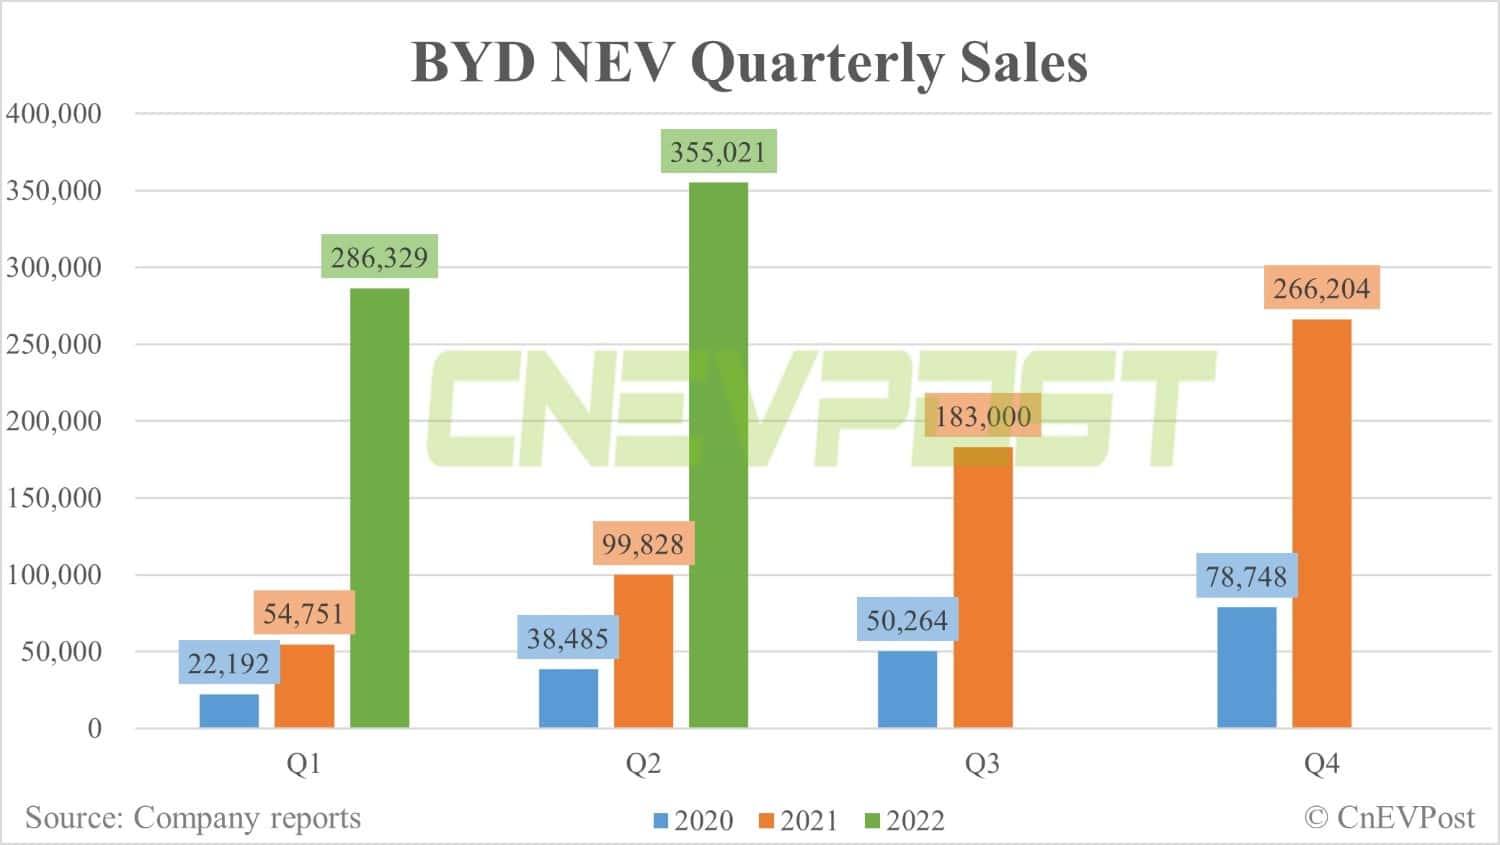 BYD's Q2 net profit soars 245% from Q1 to about $400 million-CnEVPost